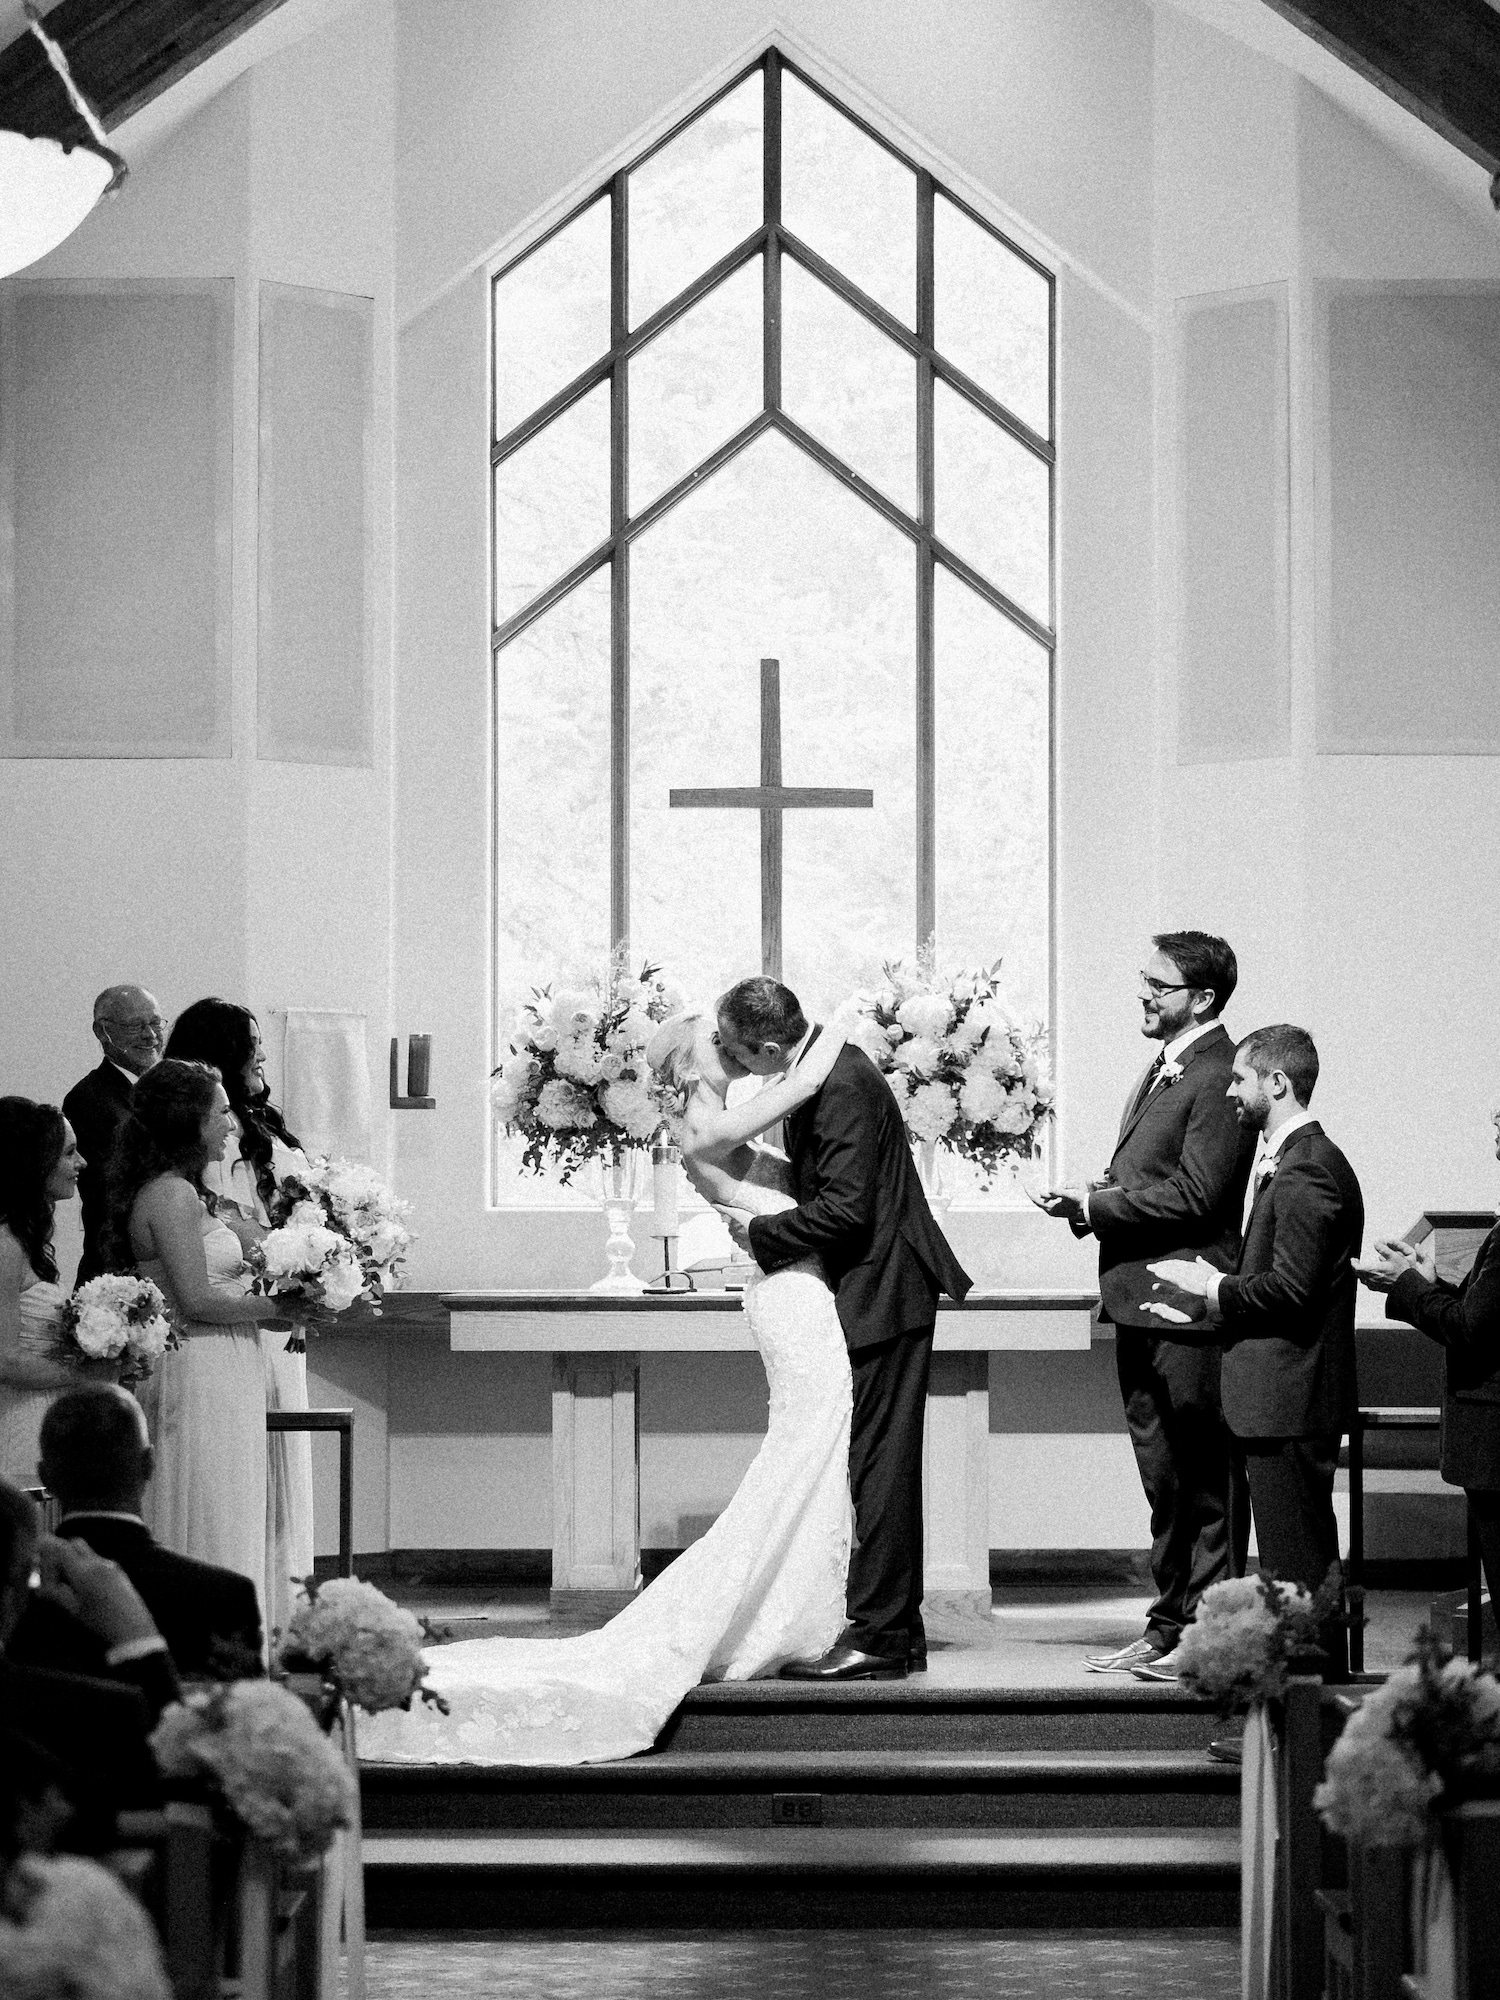 First Kiss at Vail Interfaith Chapel during a wedding ceremony